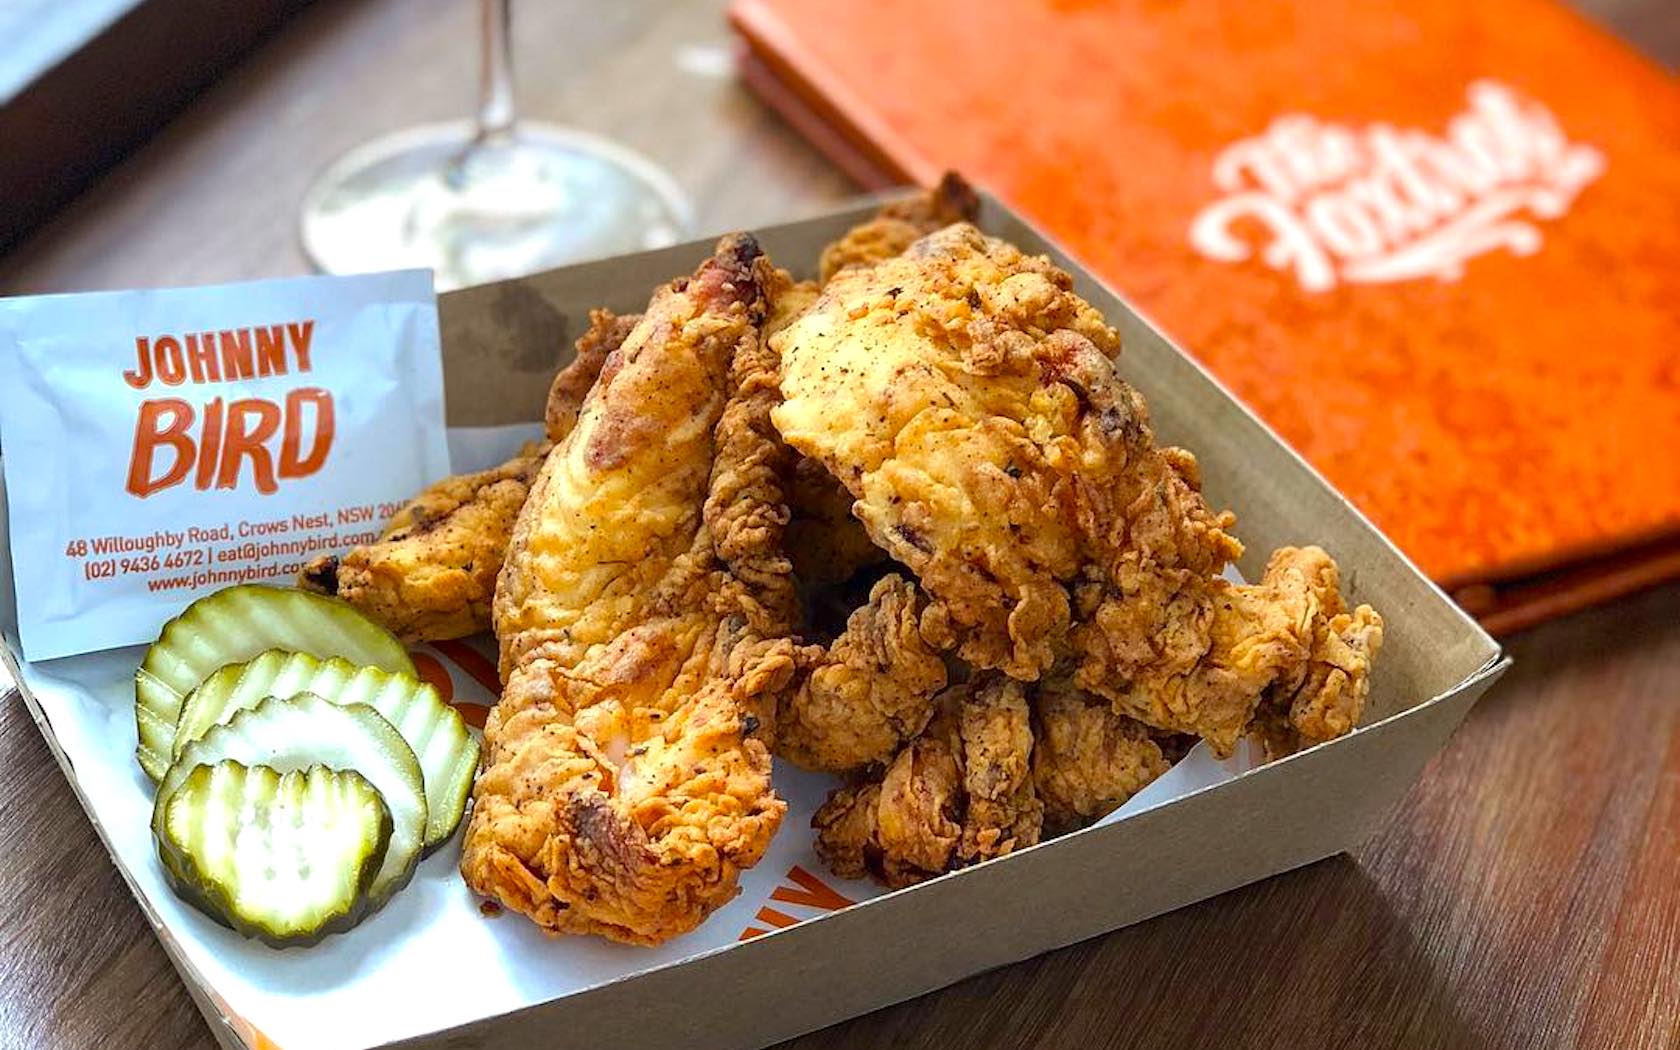 All-You-Can-Eat Fried Chicken Is Going For $30 At Johnny Bird In Sydney